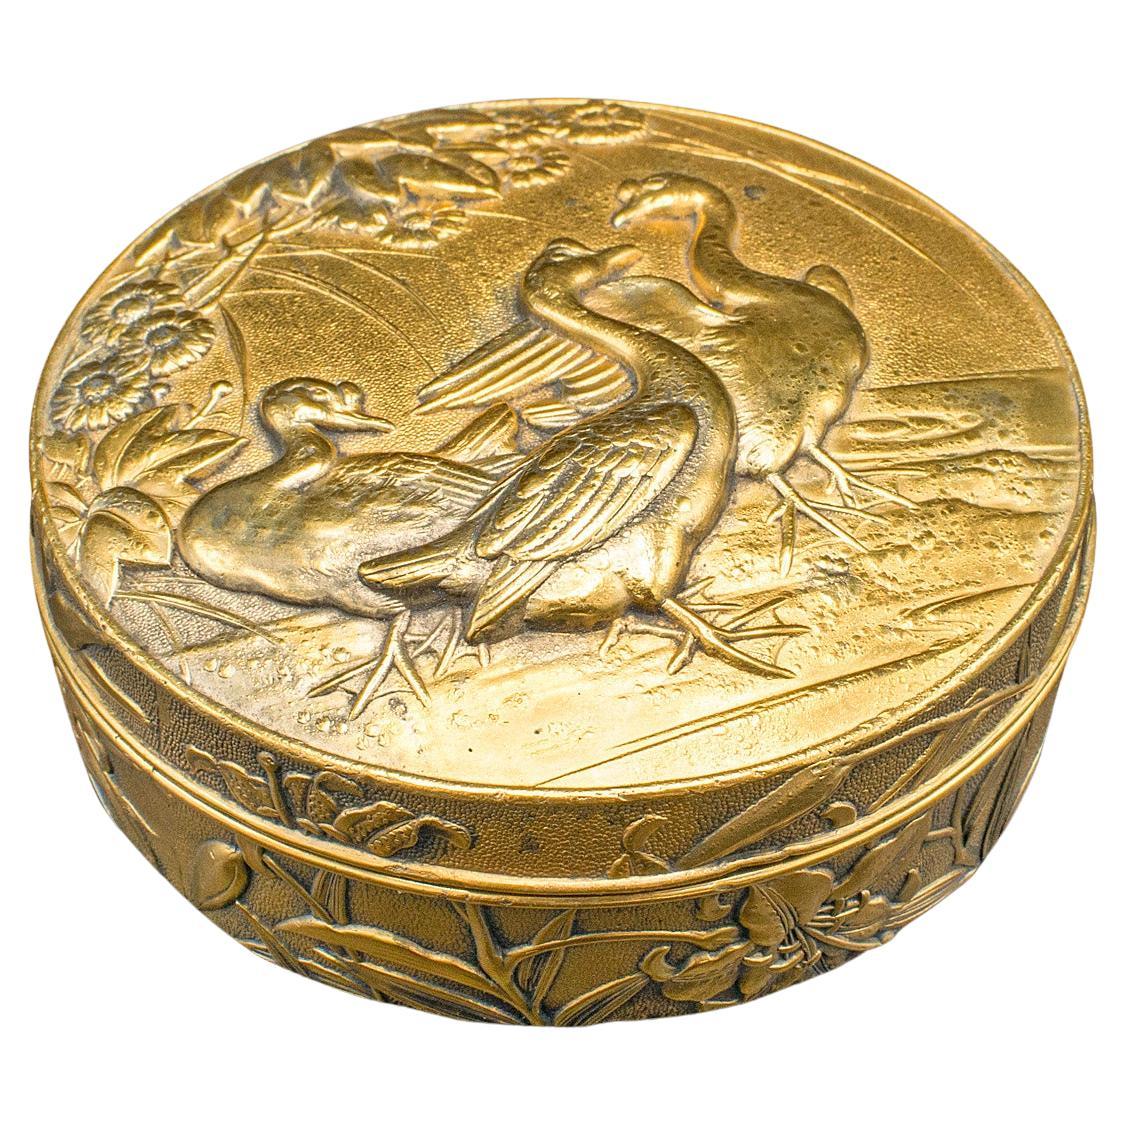 Antique Snuff Tin, English Gilt Metal, Lidded Box, Relief Decor, Victorian, 1880 For Sale